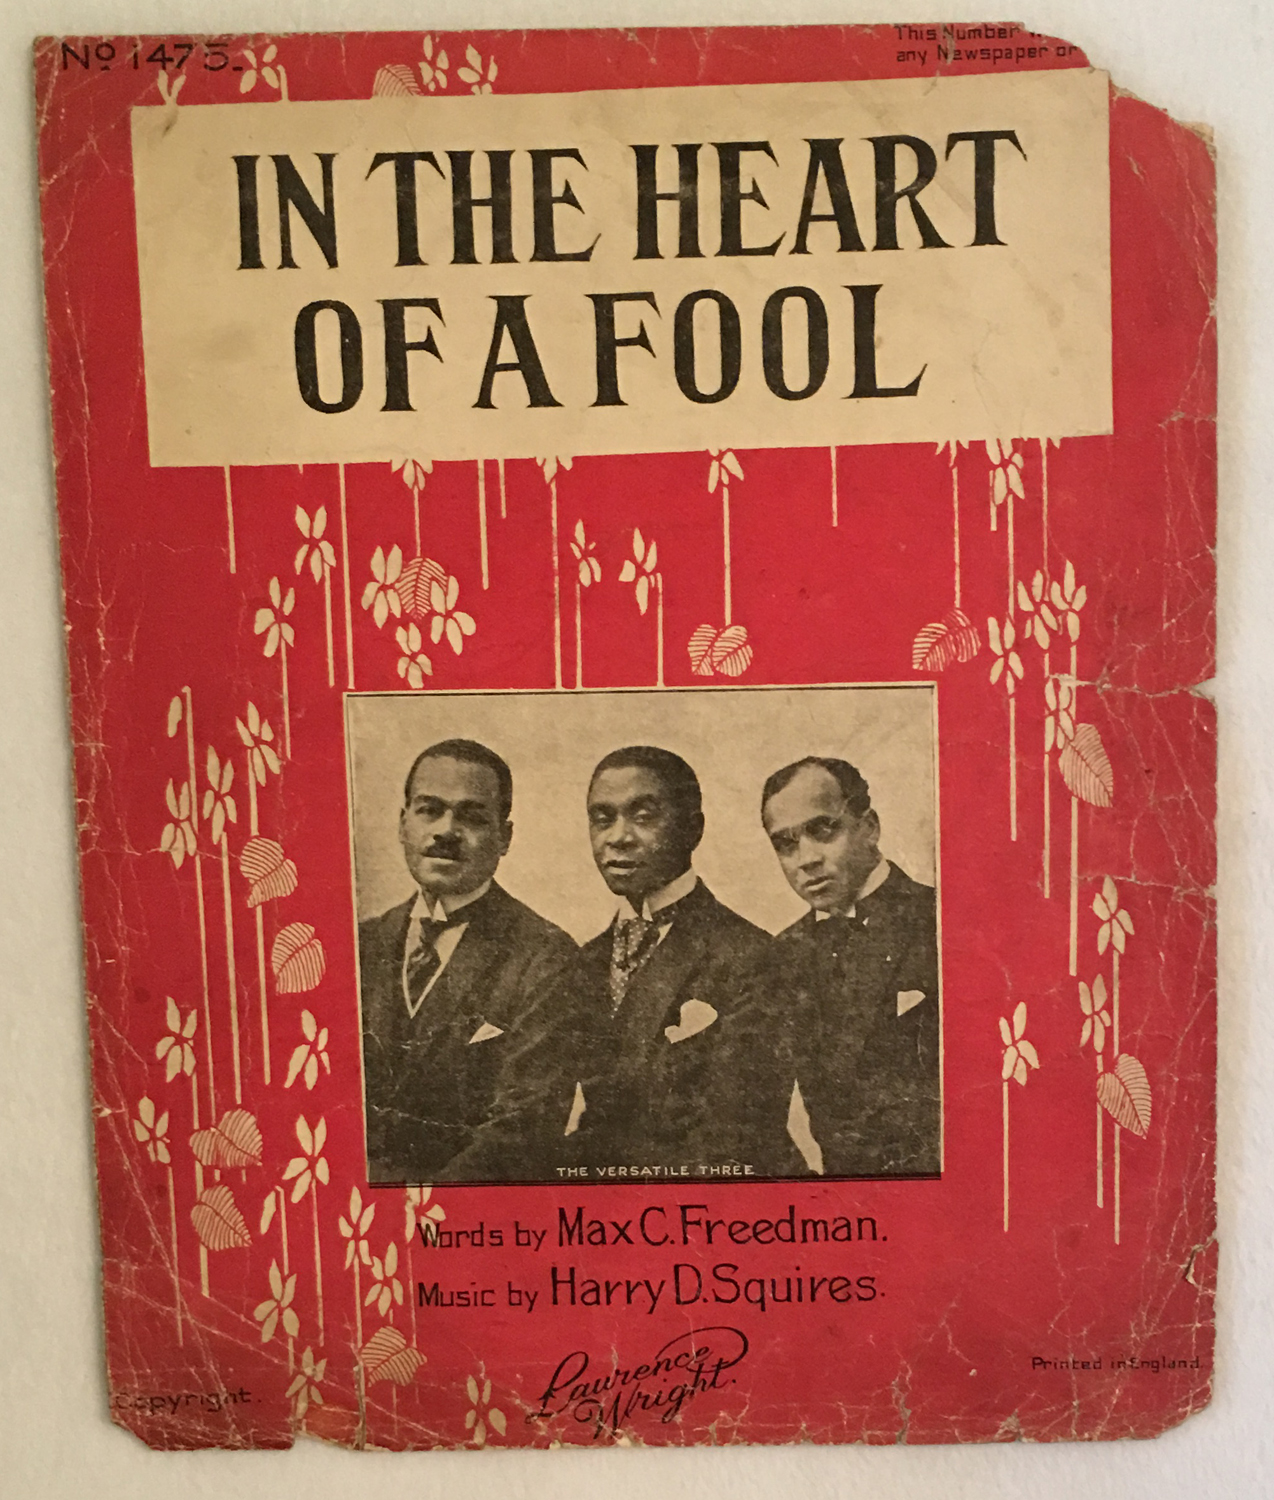 Image for In the Heart of a Fool by The Versatile Three -- Sheet Music, 1919